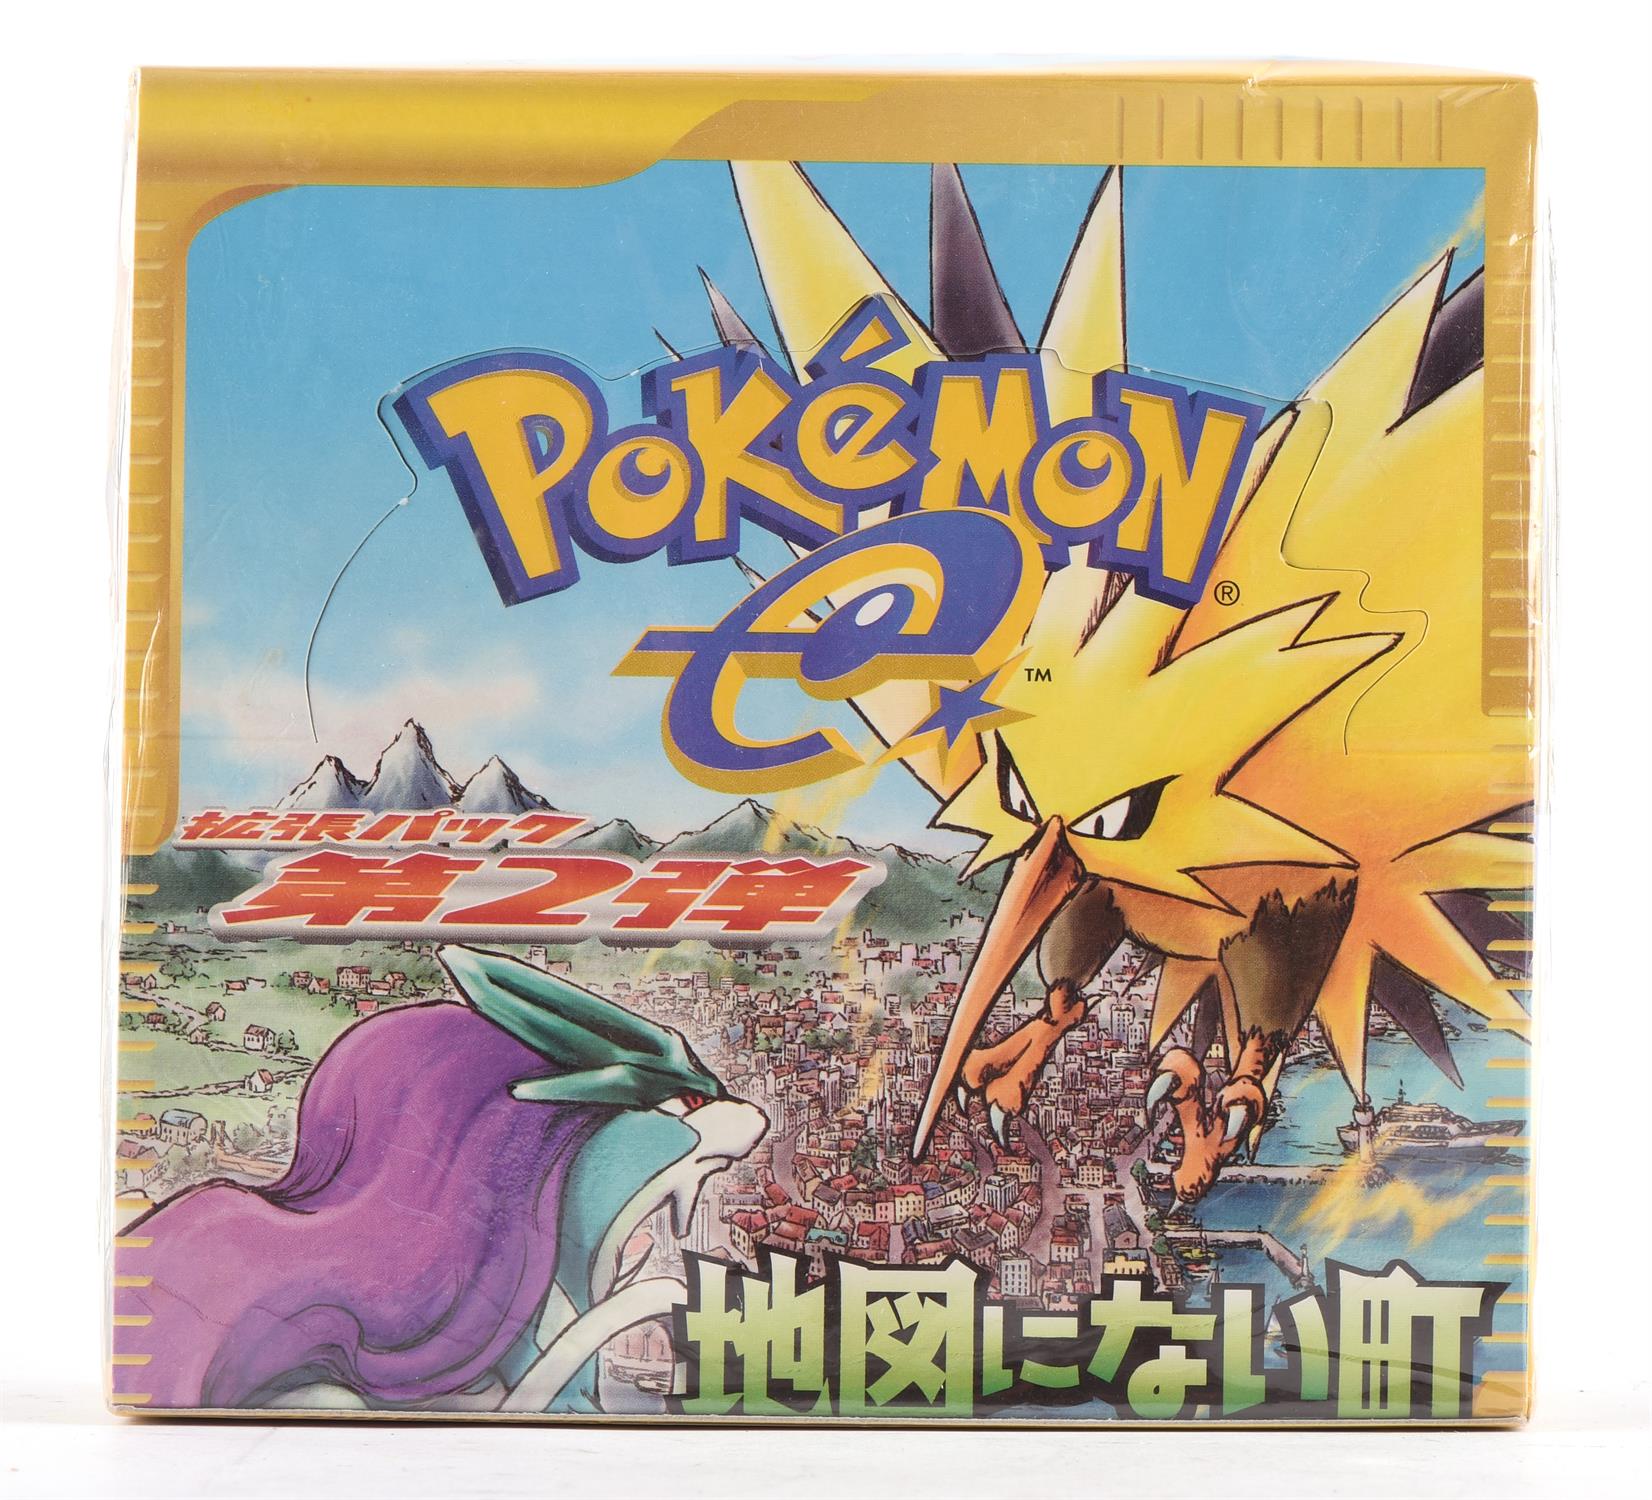 Pokemon TCG. Japanese Town On No Map (Aquapolis), 2002 first edition e-series sealed booster box of - Image 7 of 7